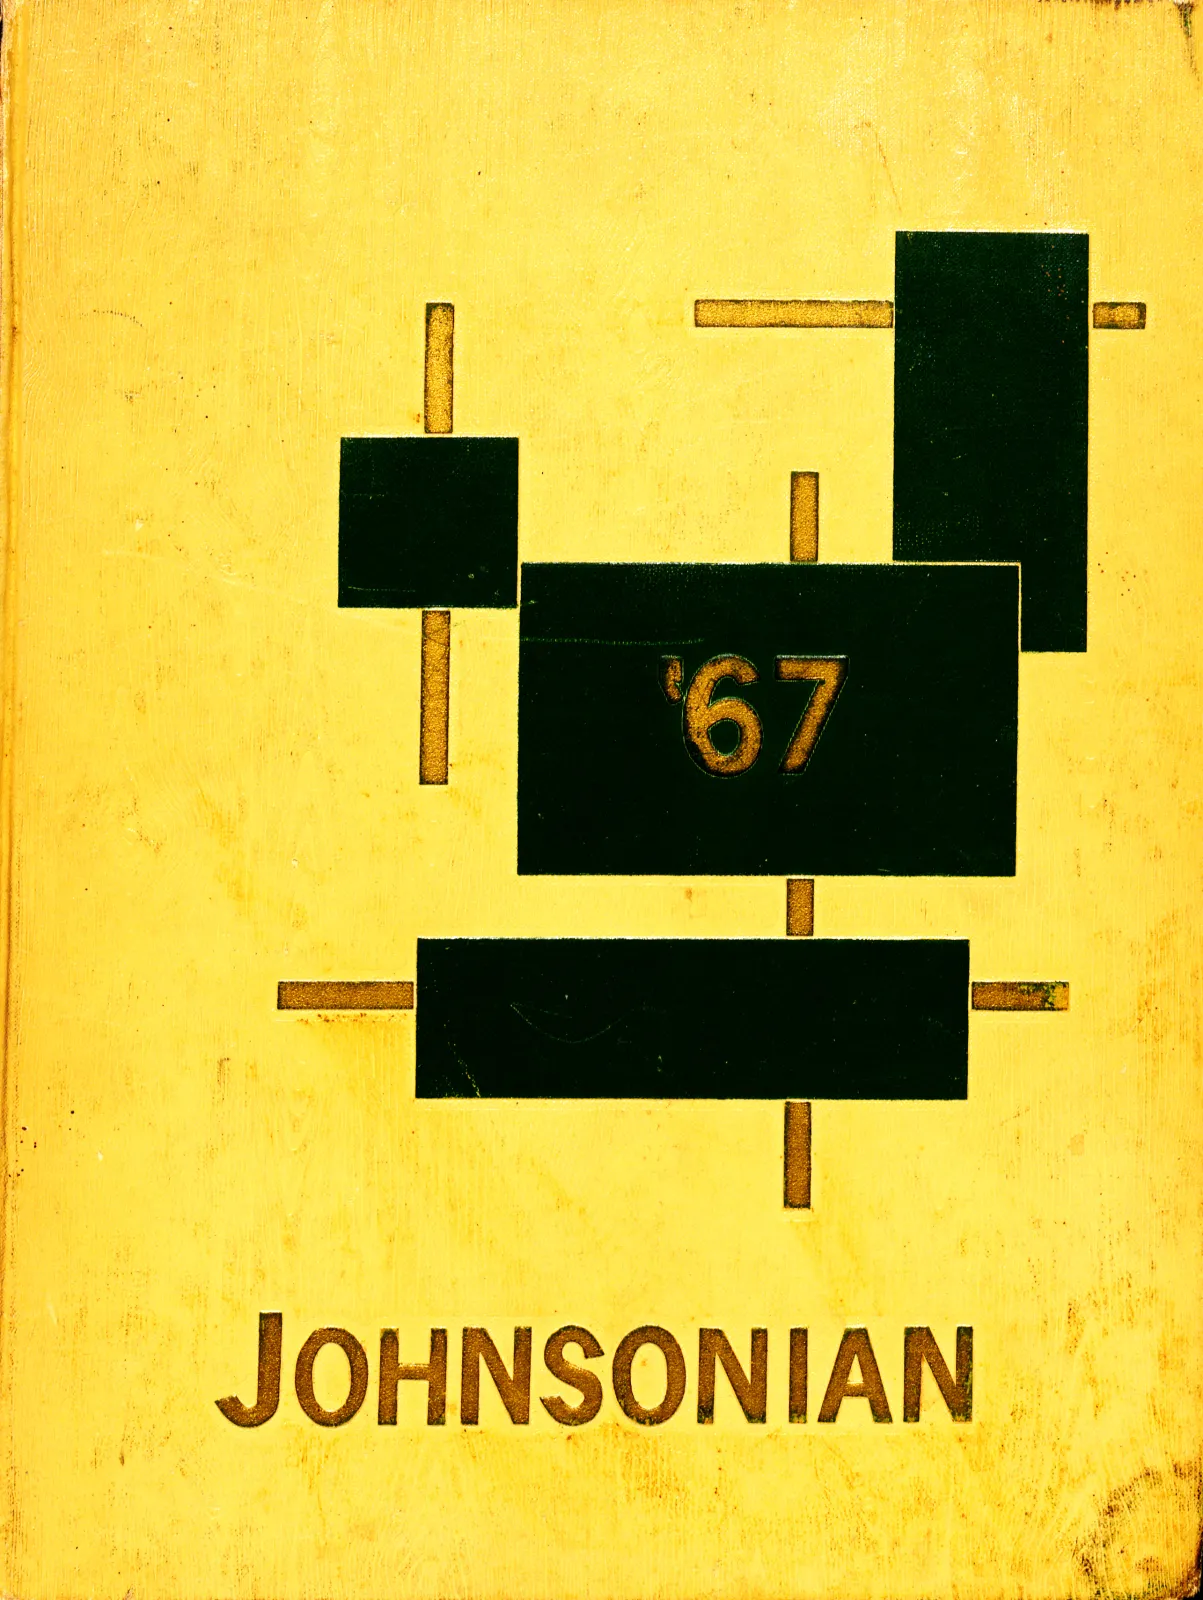 Image of the cover of the C.A. Johnson High School 1967 Johnsonian yearbook.